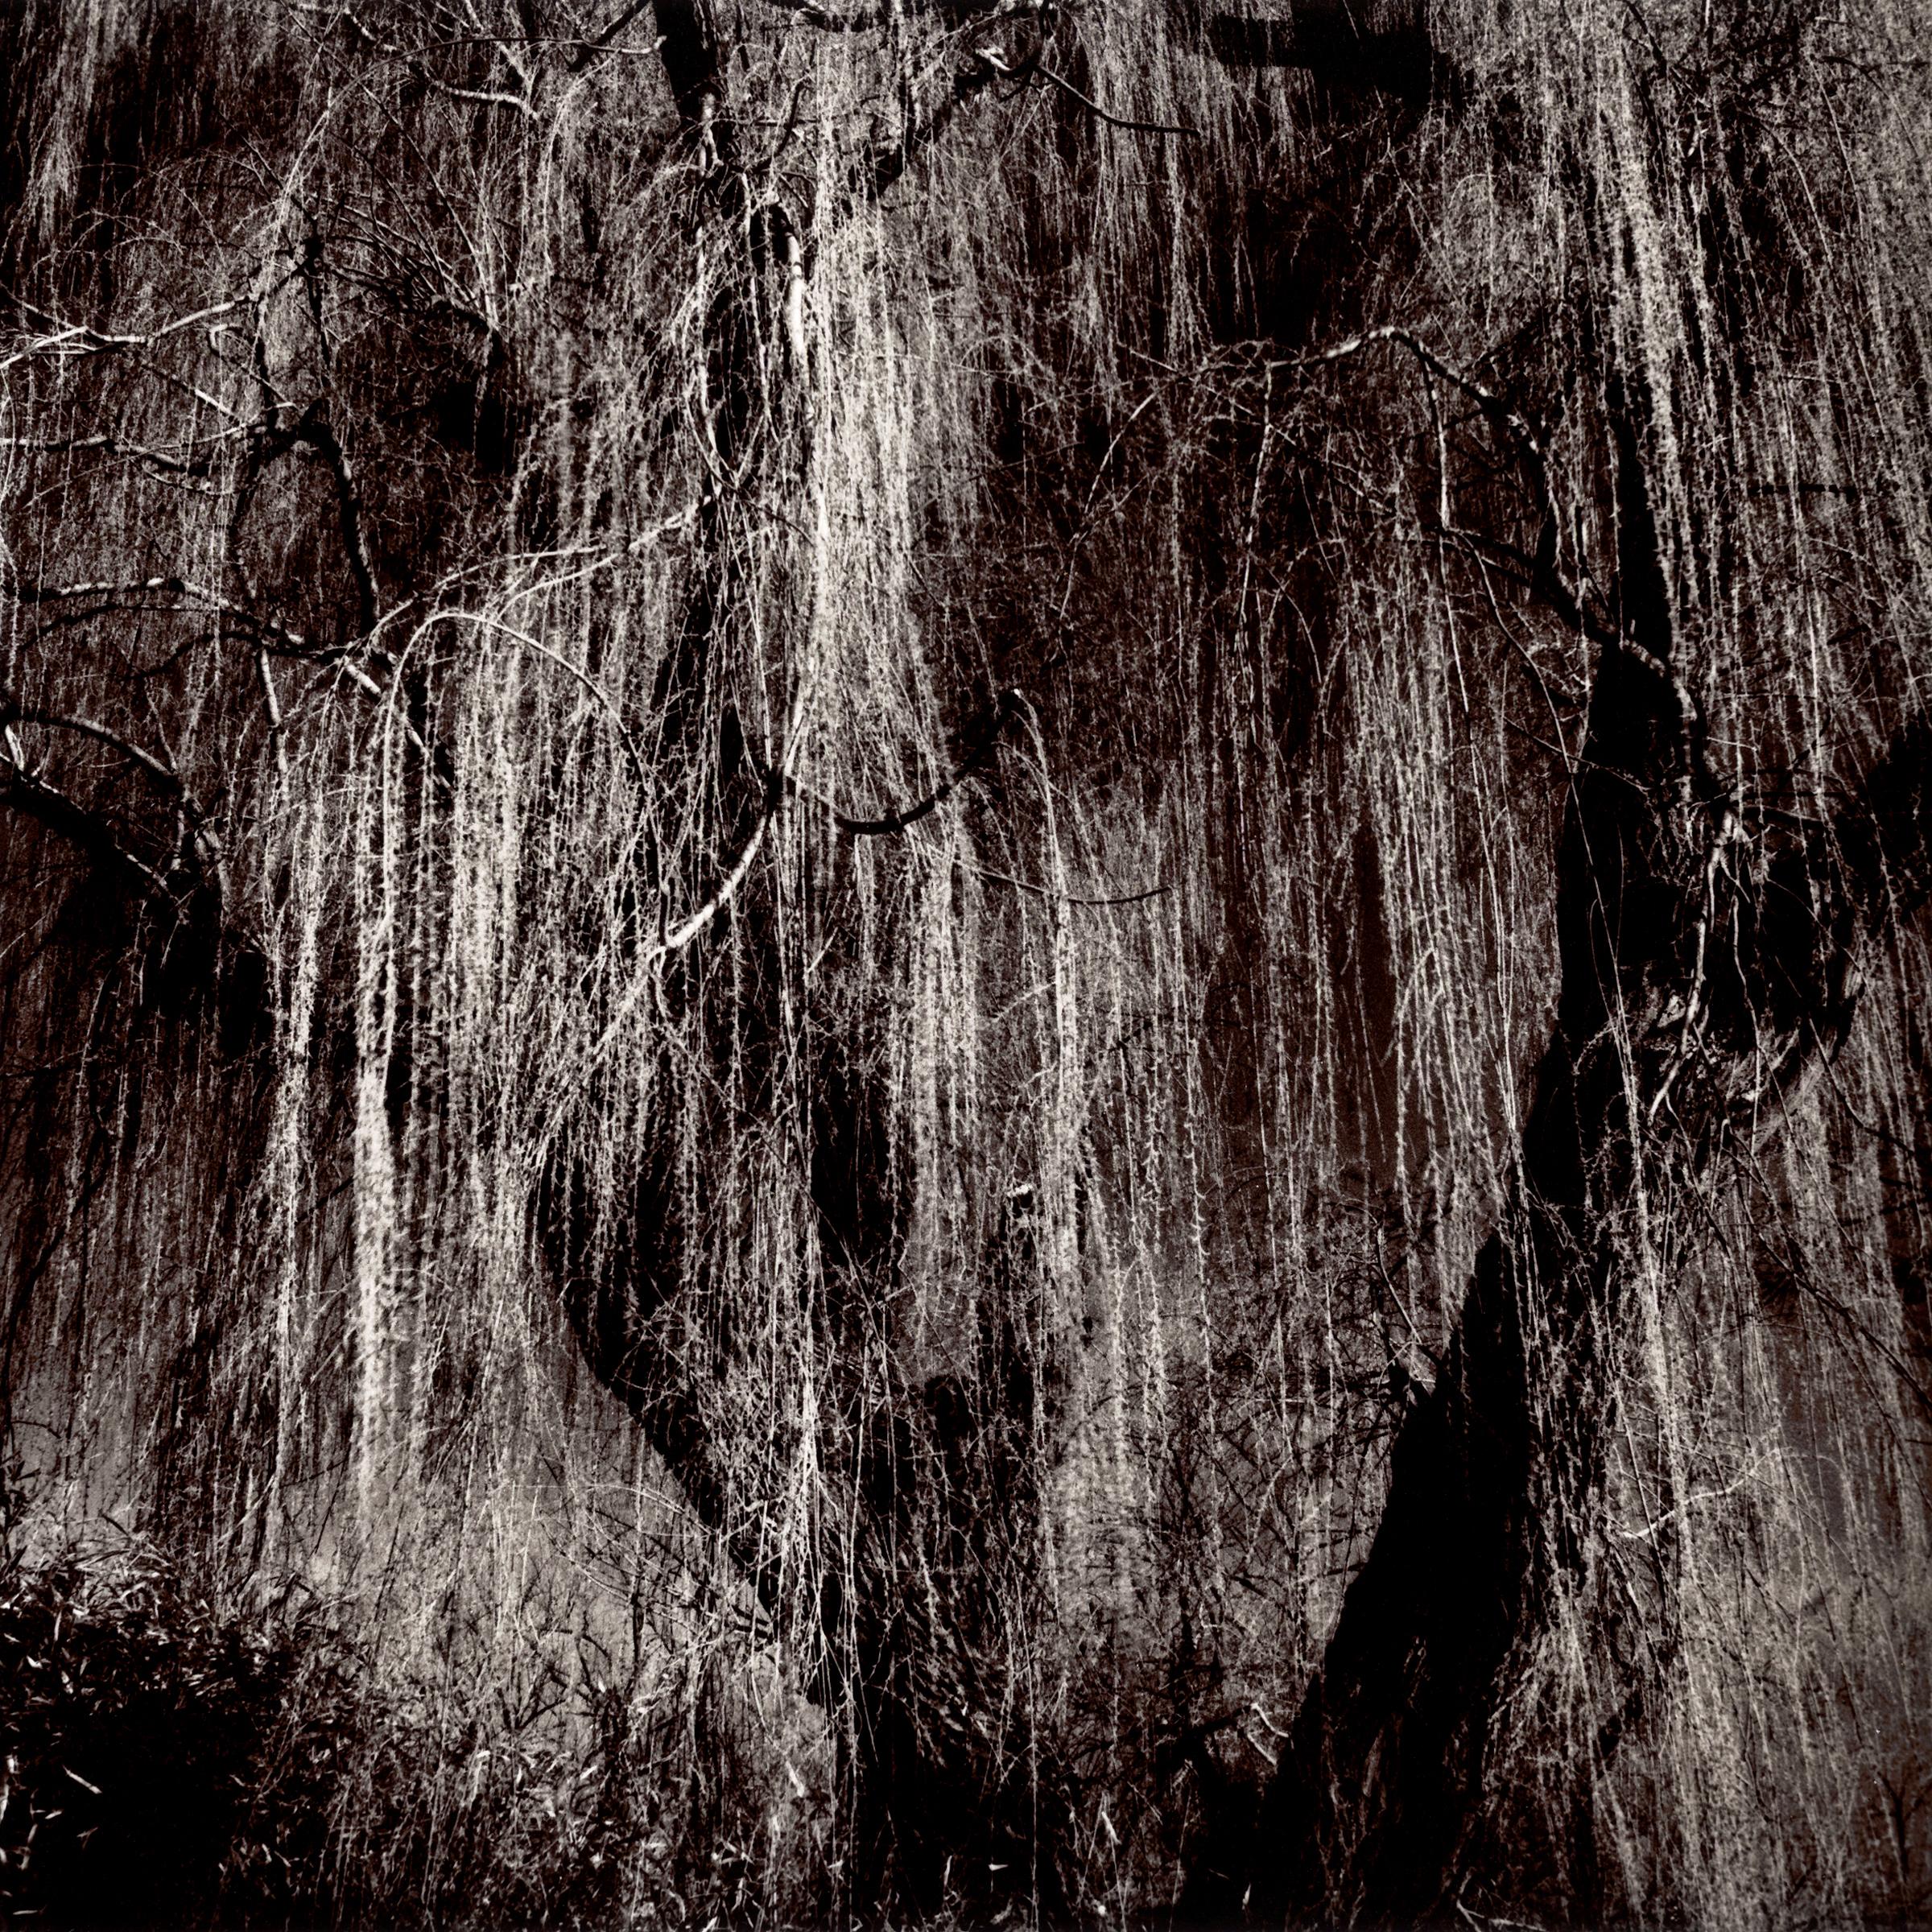 Willow #3 (Great Falls Park) - contemporary black and white landscape photograph